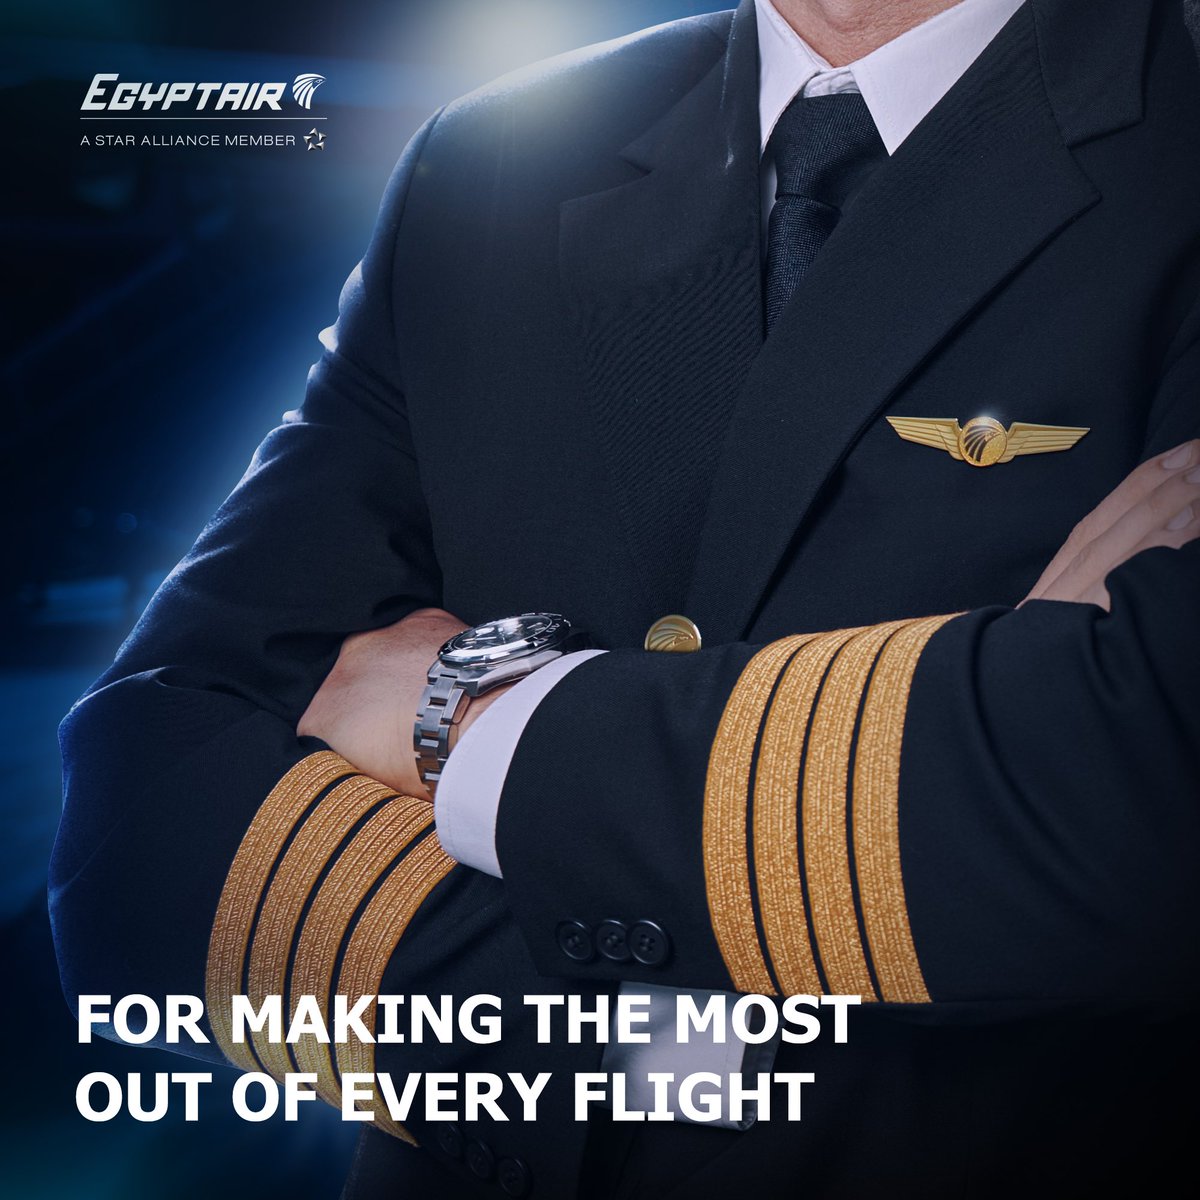 We honor the fearless aviators who navigate our skies with skill and courage. To the pilots of #EGYPTAIR, your dedication and bravery inspire us all. Thank you for flying to new heights and showing care and compassion for every traveler onboard an unforgettable adventure. Happy